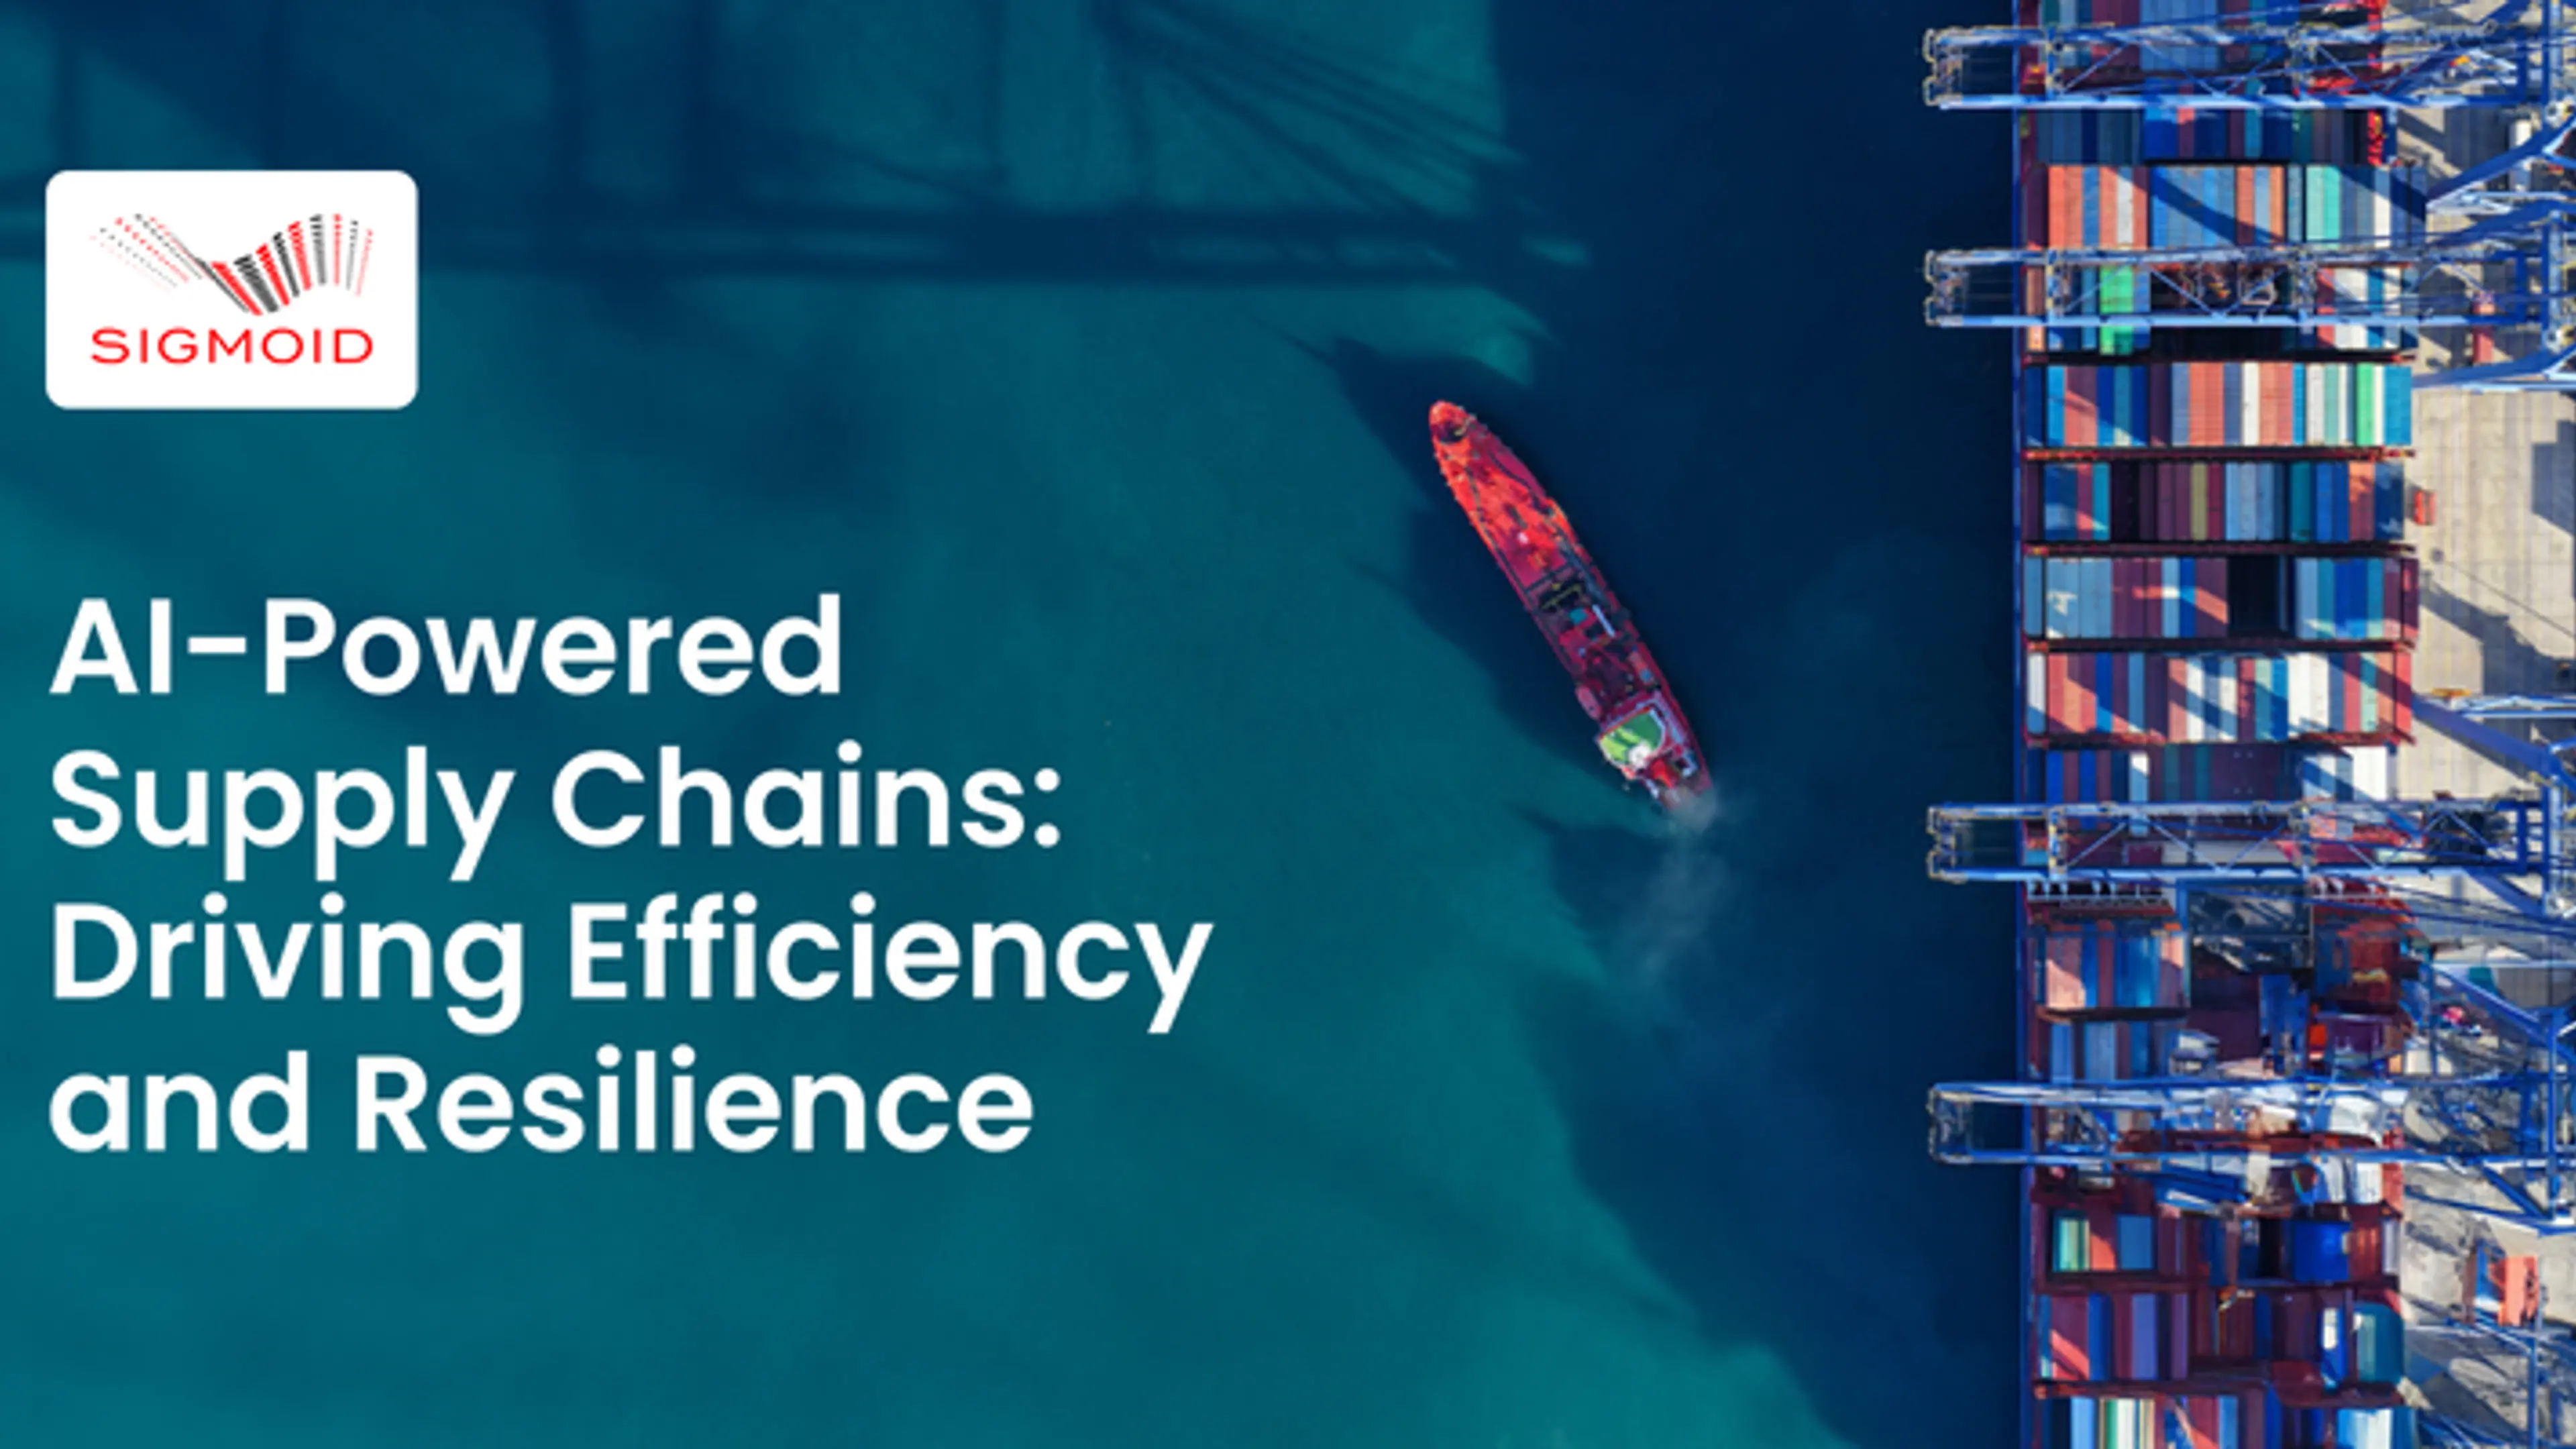 Forging resilient supply chains through data and AI